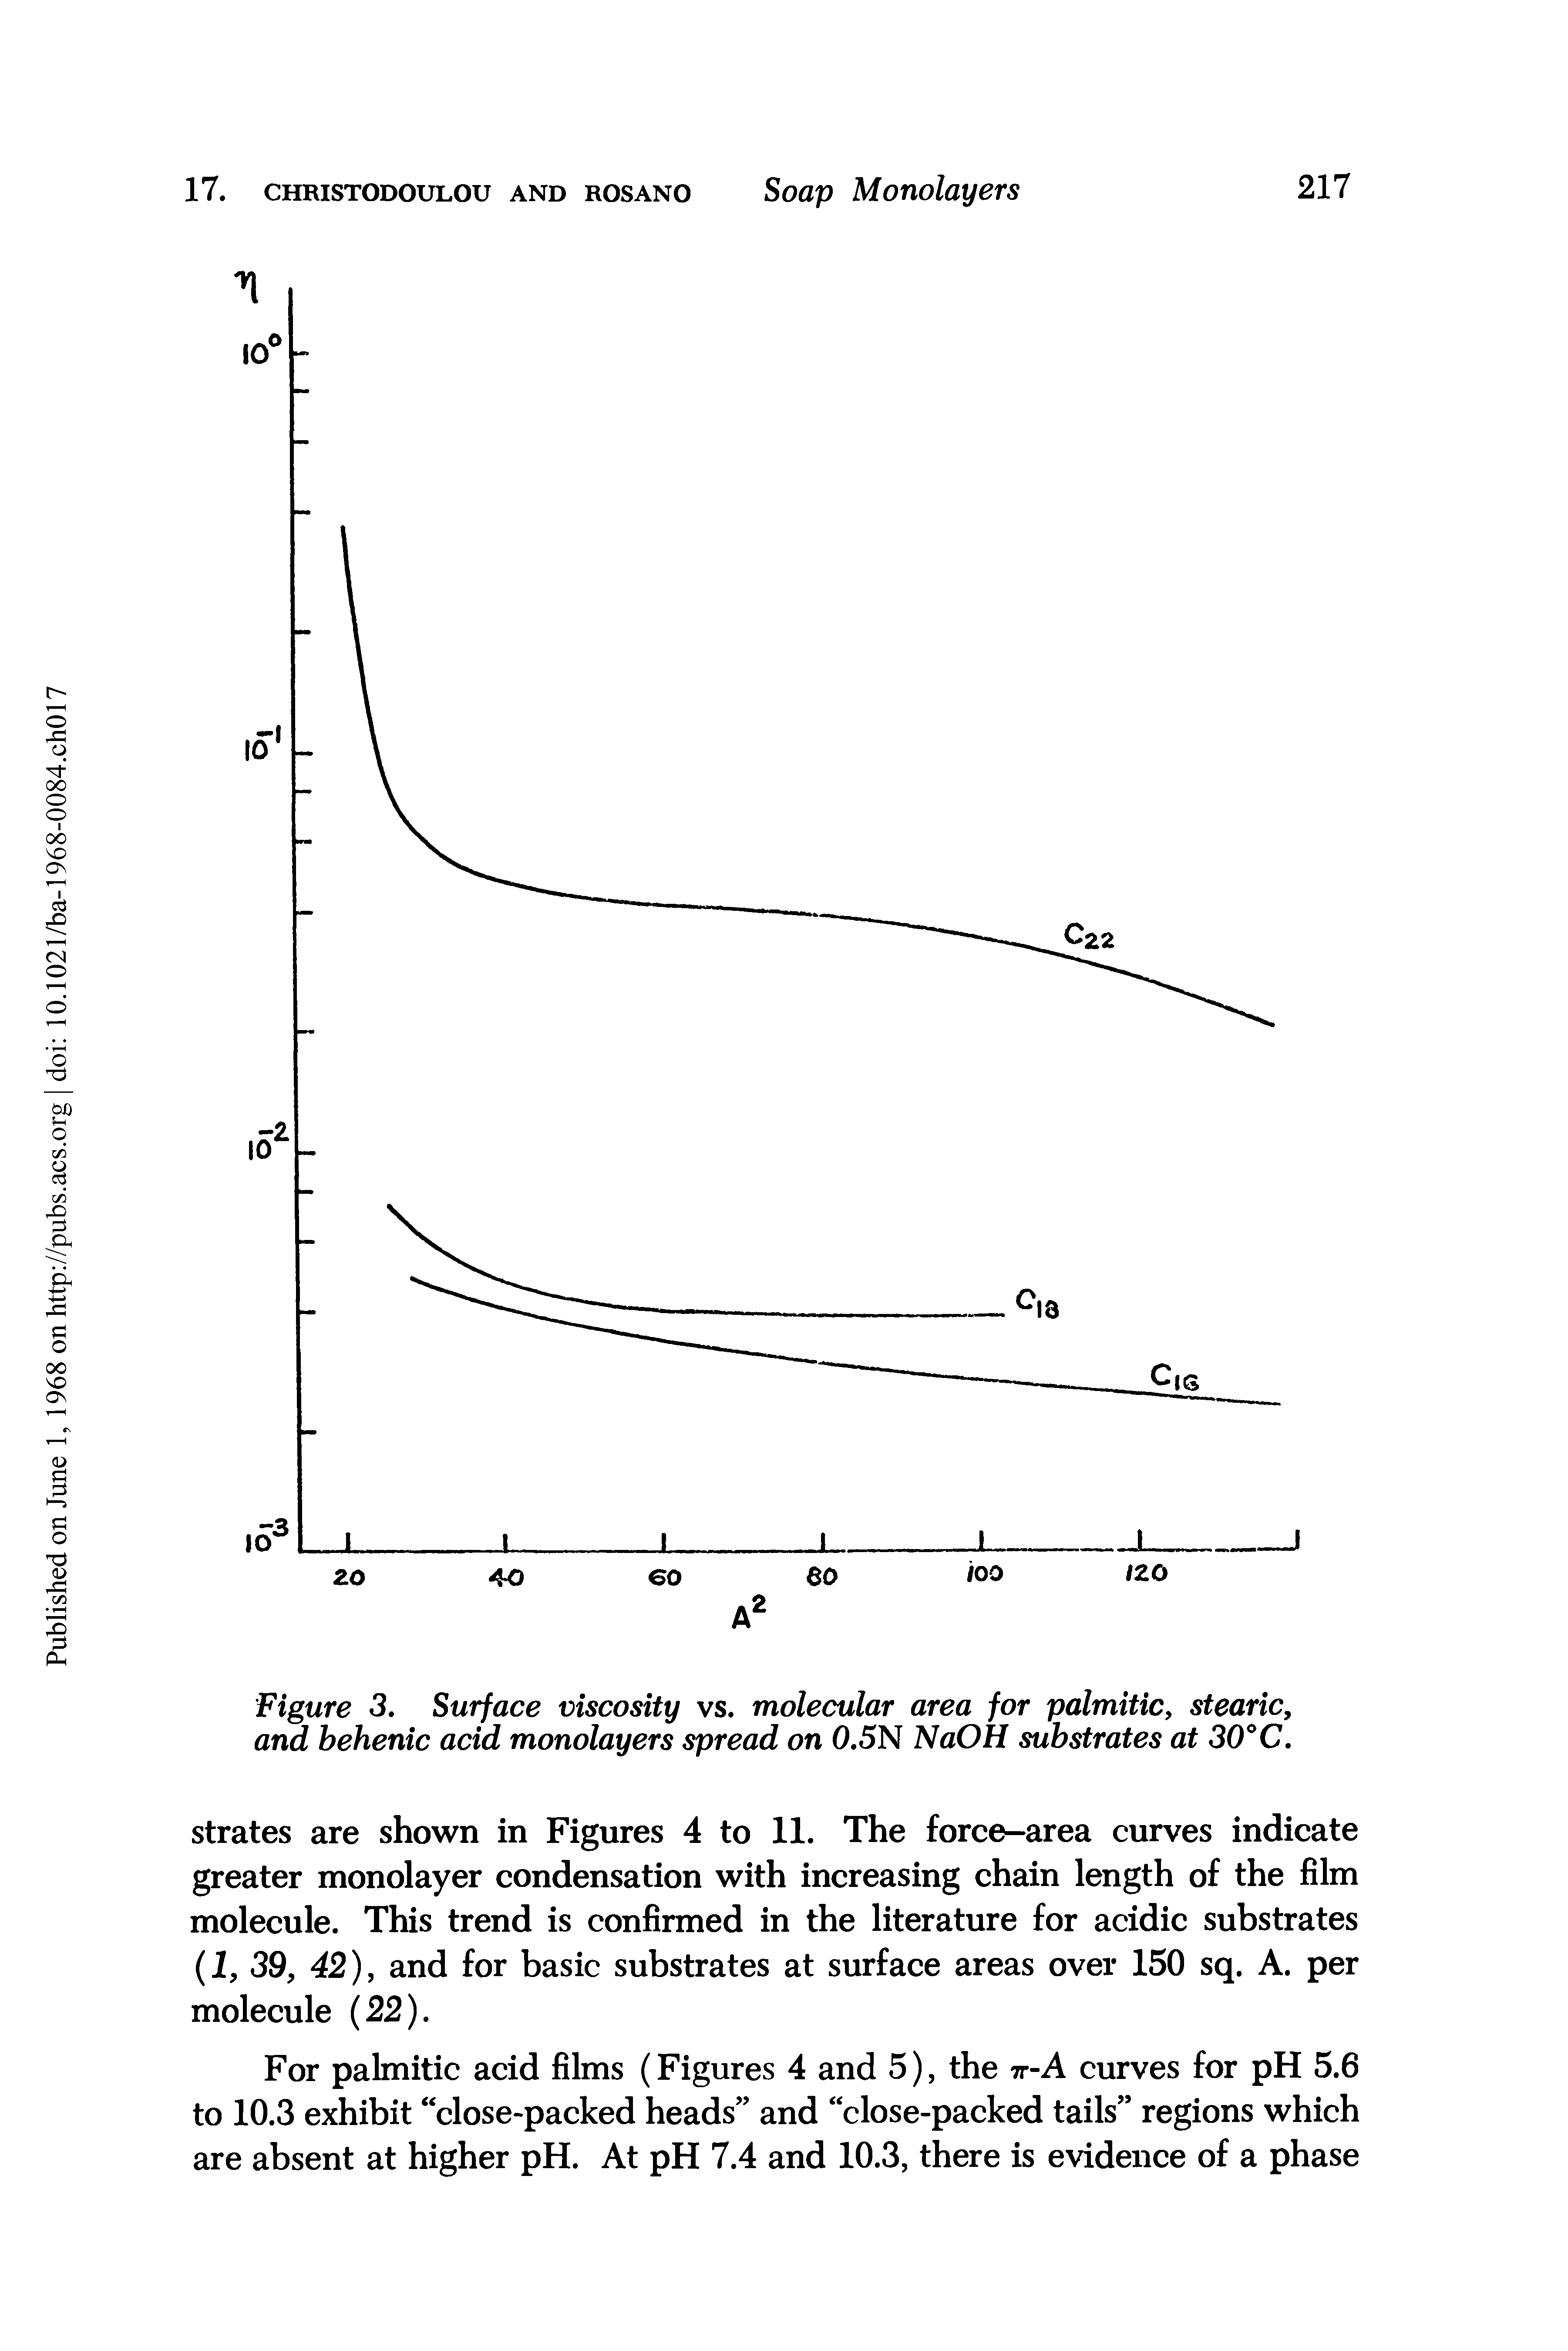 Figure 3. Surface viscosity vs. molecular area for palmitic, stearic, and behenic acid monolayers spread on 0.5N NaOH substrates at 30°C.